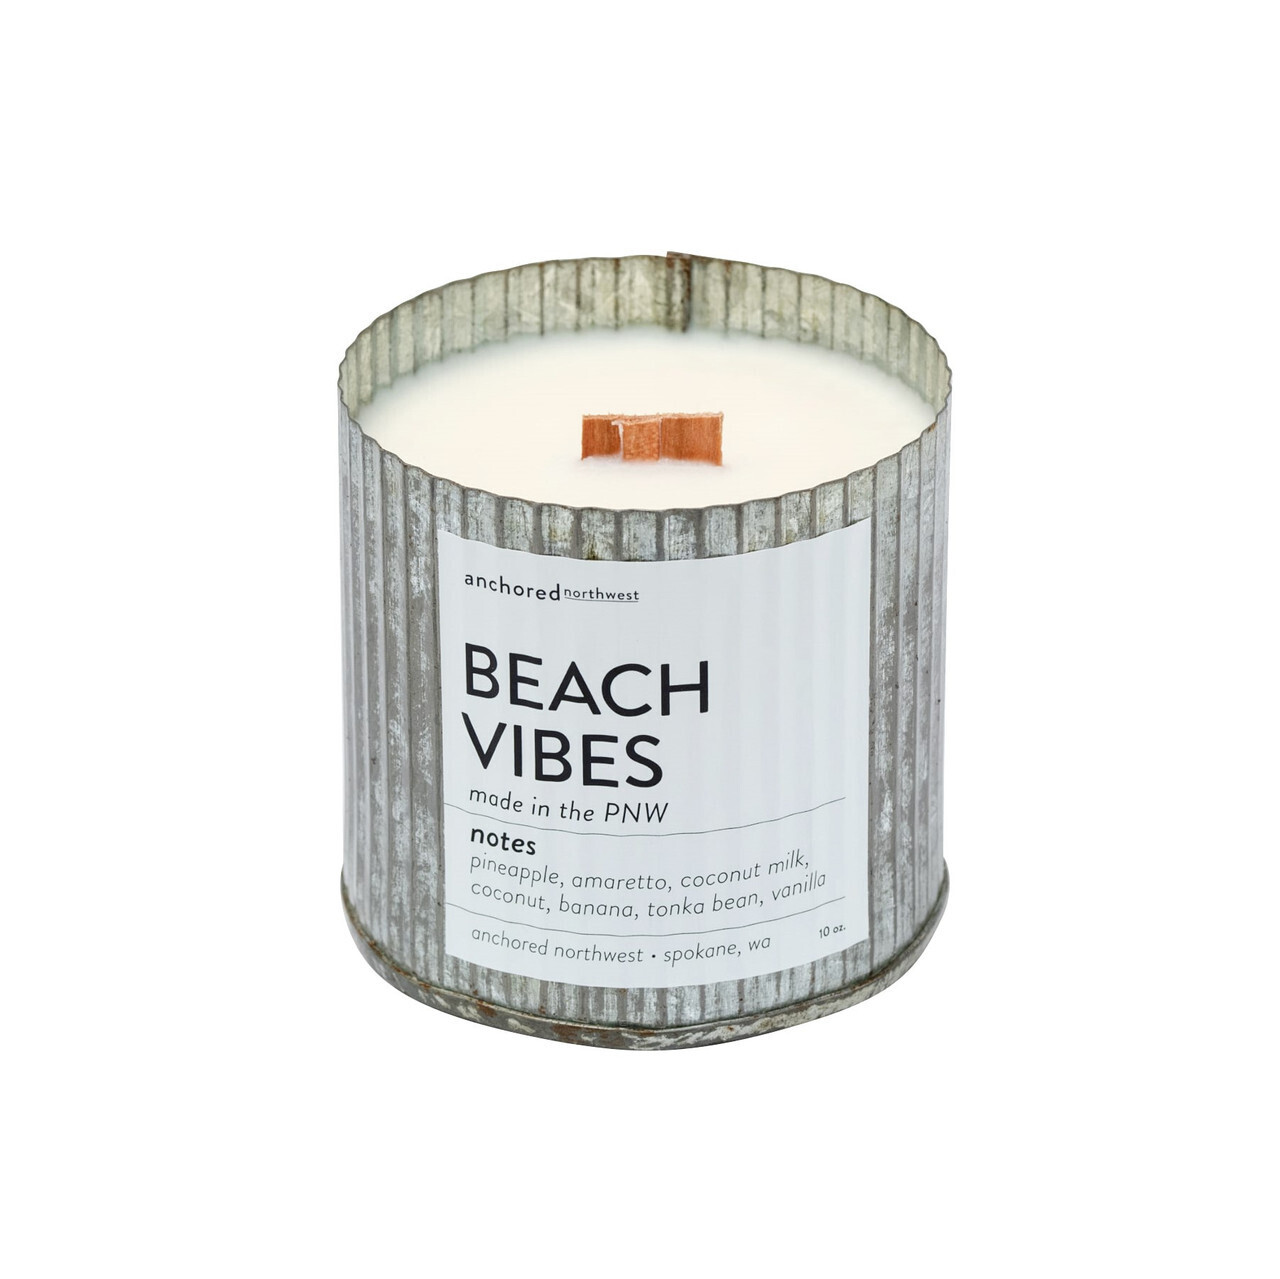 Beach Vibes Rustic Vintage Candle by Anchored Northwest